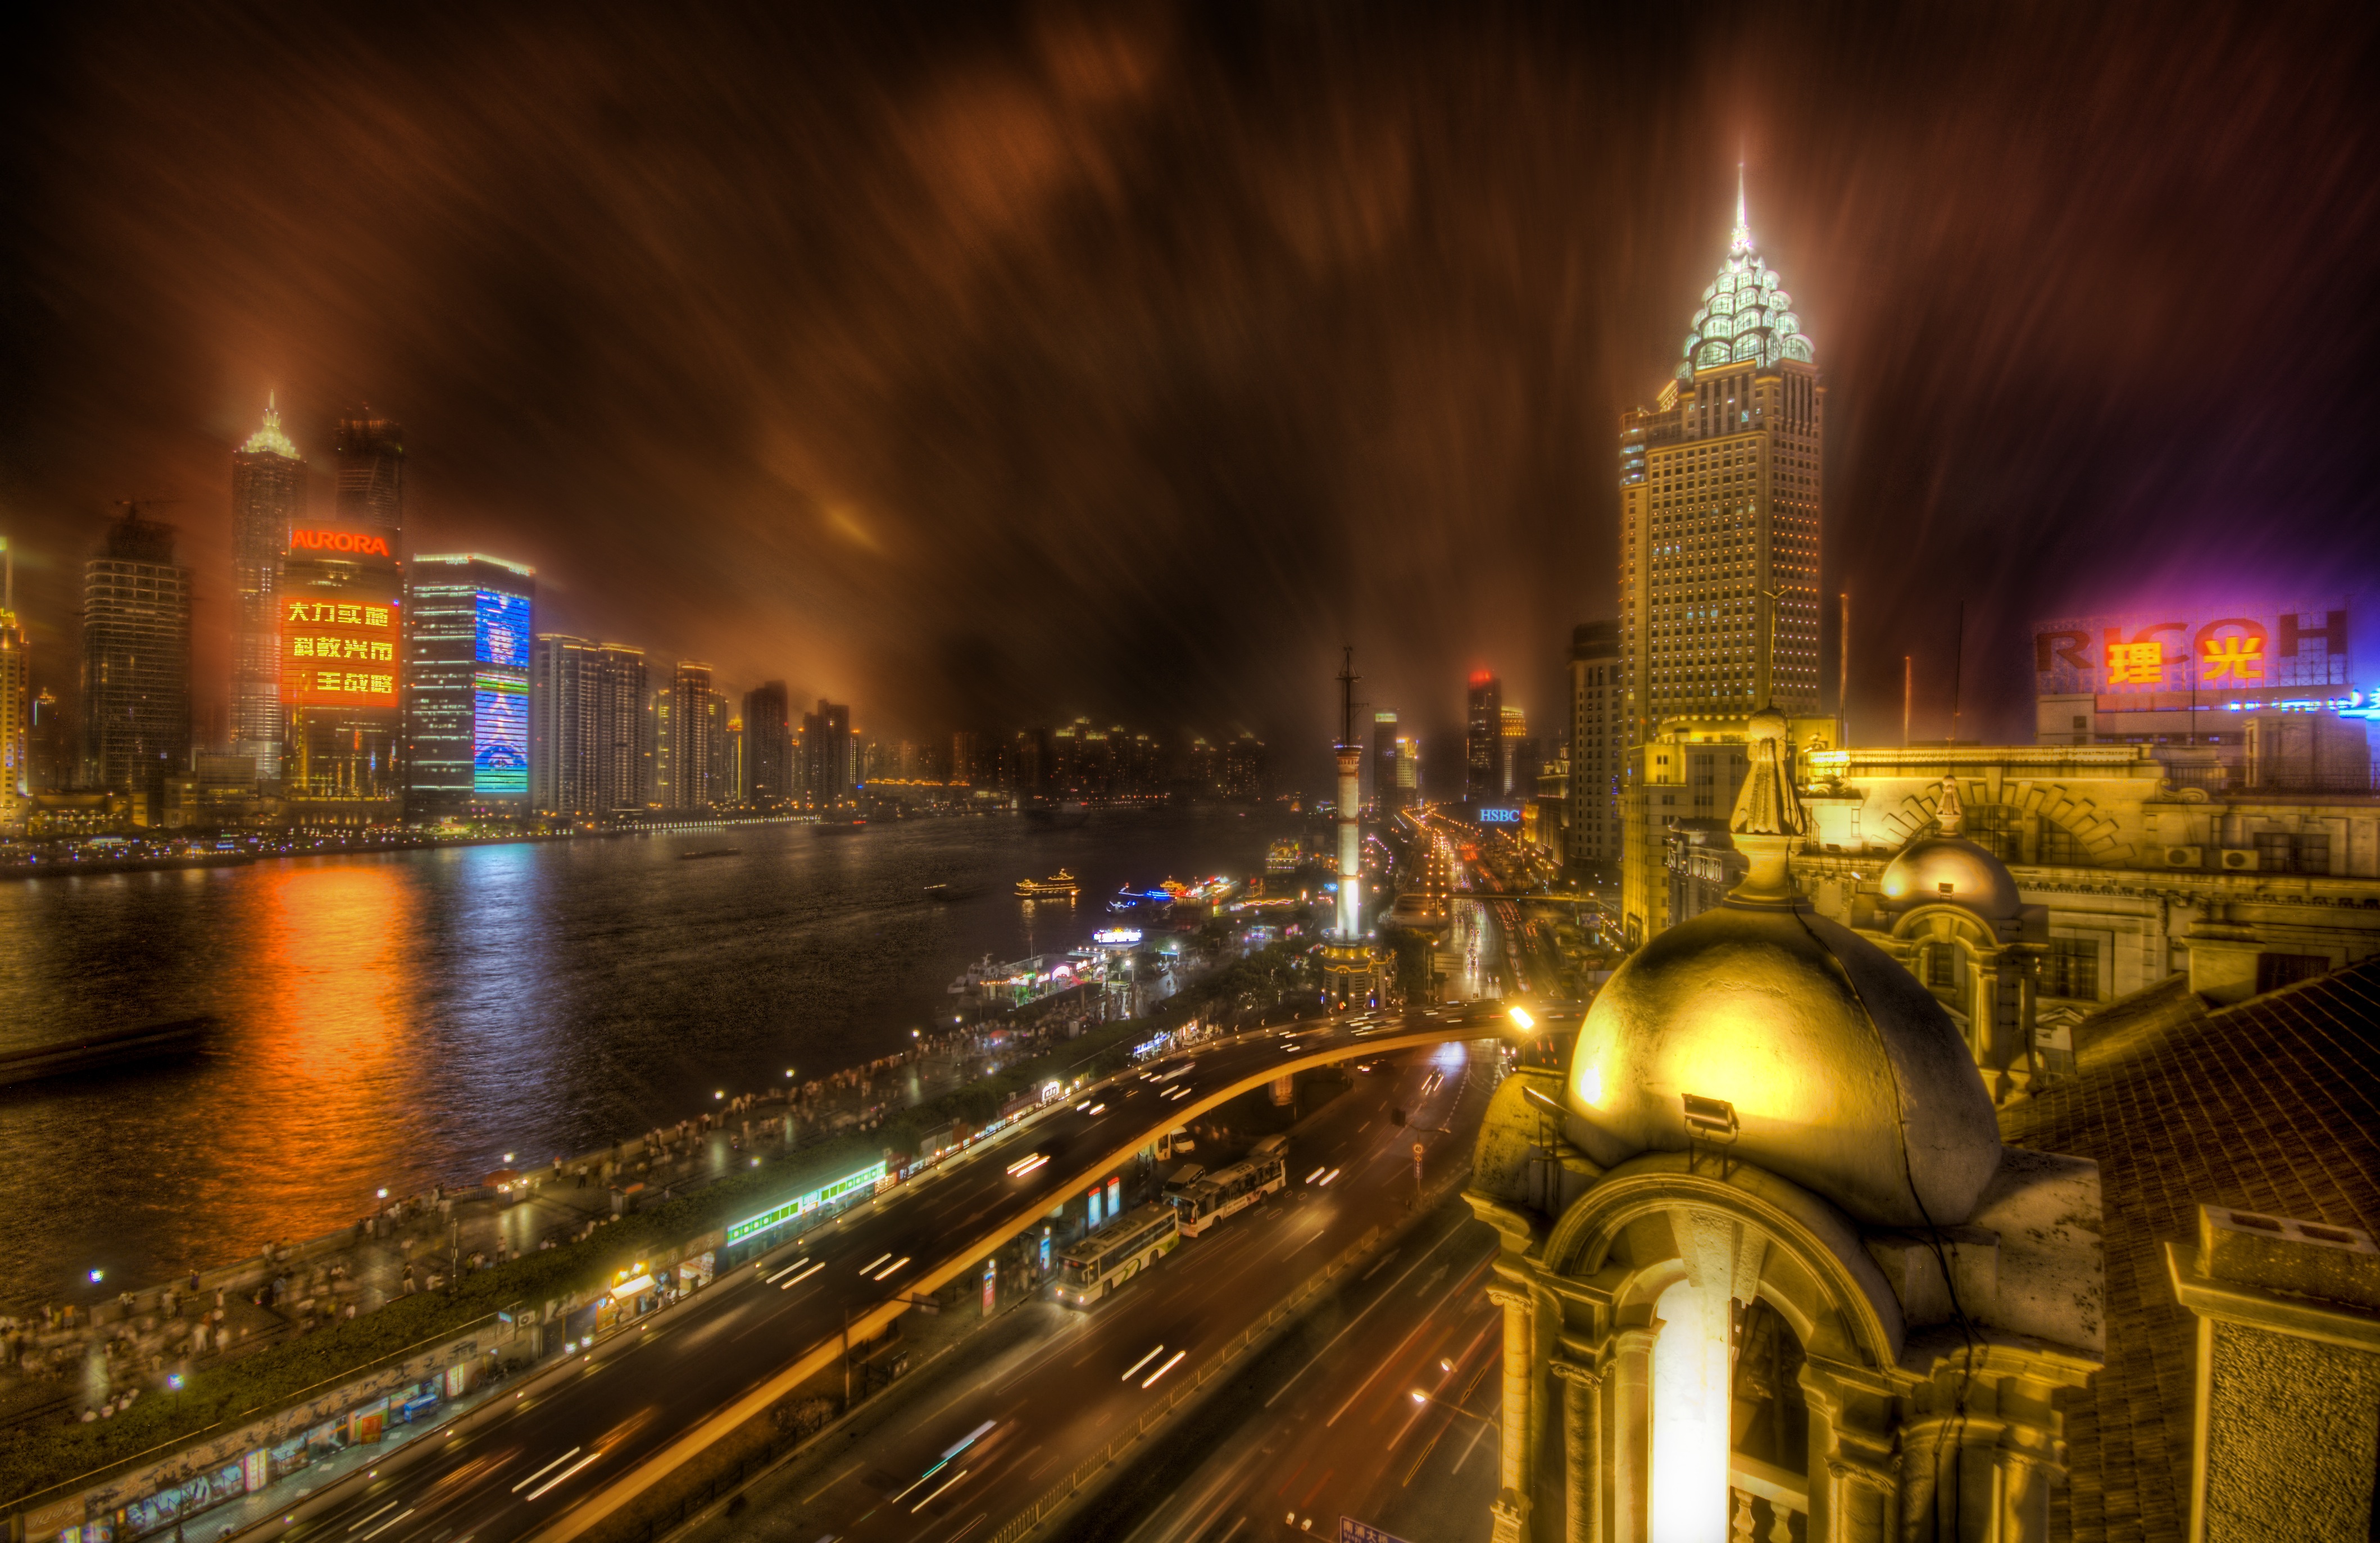 The Bund after the rain by Trey Ratcliff